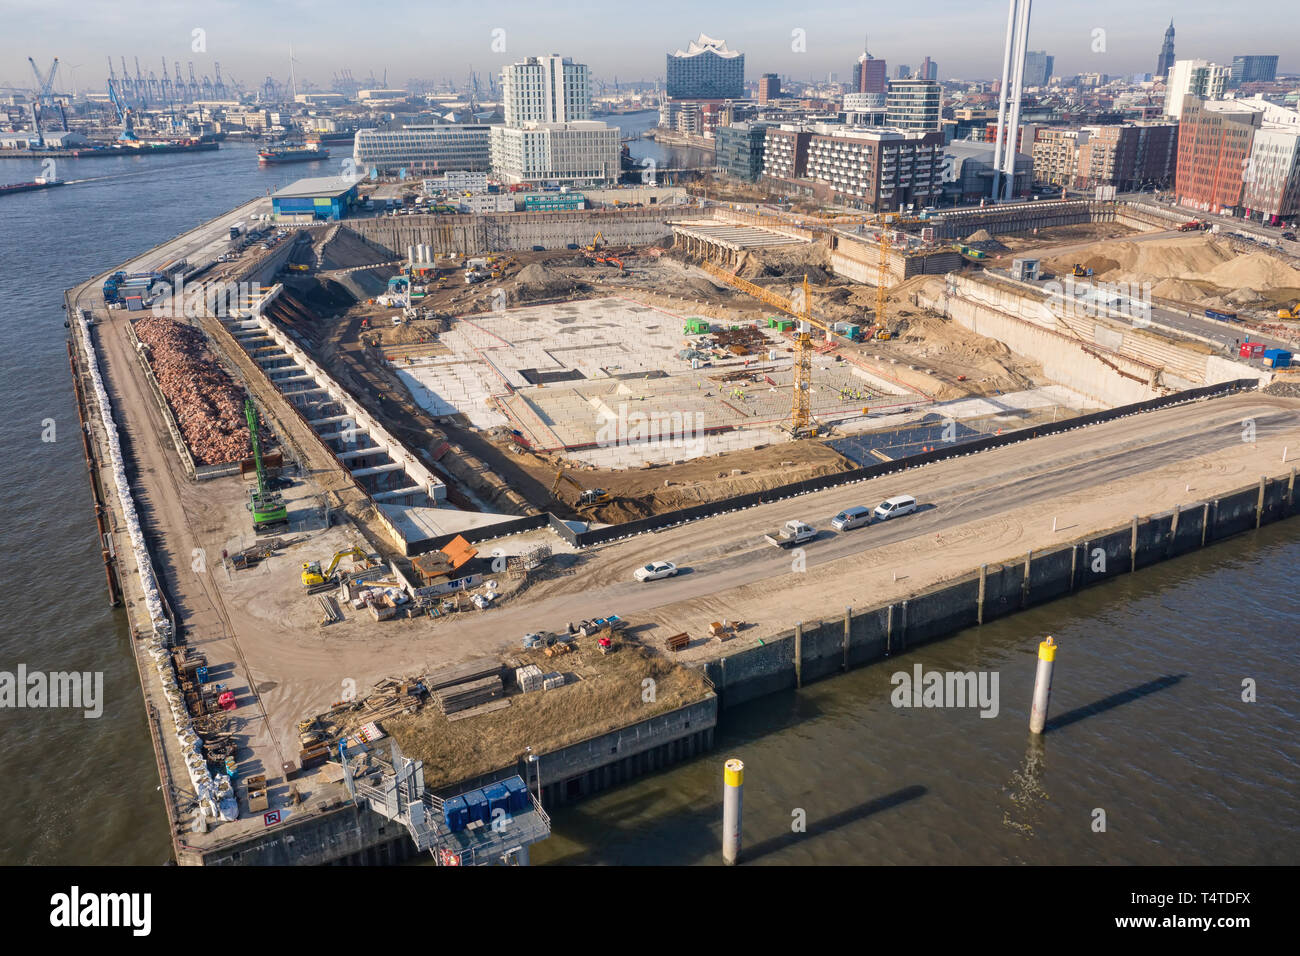 construction site of the Ueberseequartier project in the Hafencity of Hamburg Stock Photo